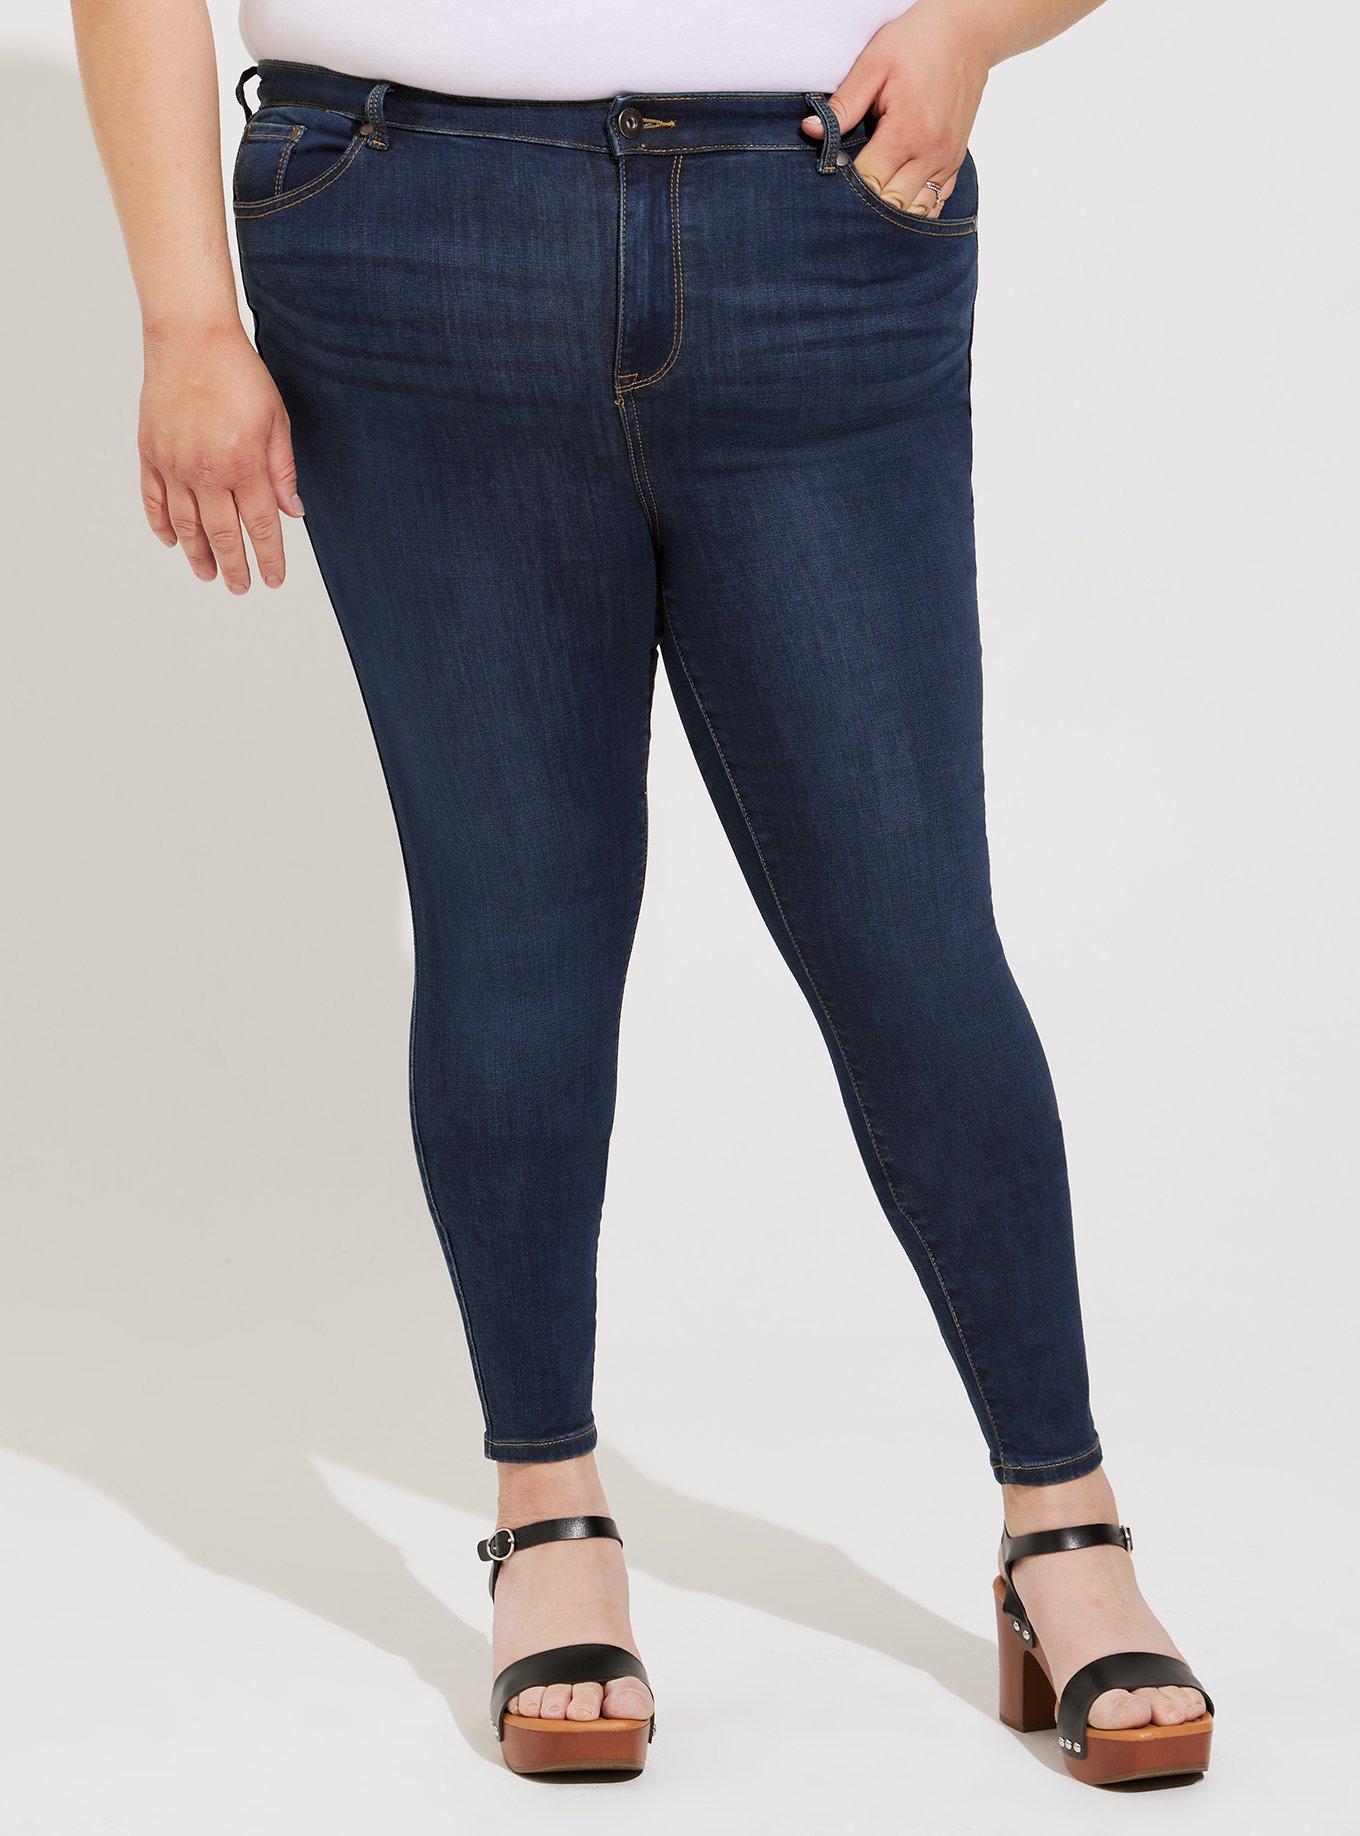 Ultra-Flattering Colombian High-Waisted Skinny Jeans with Tummy